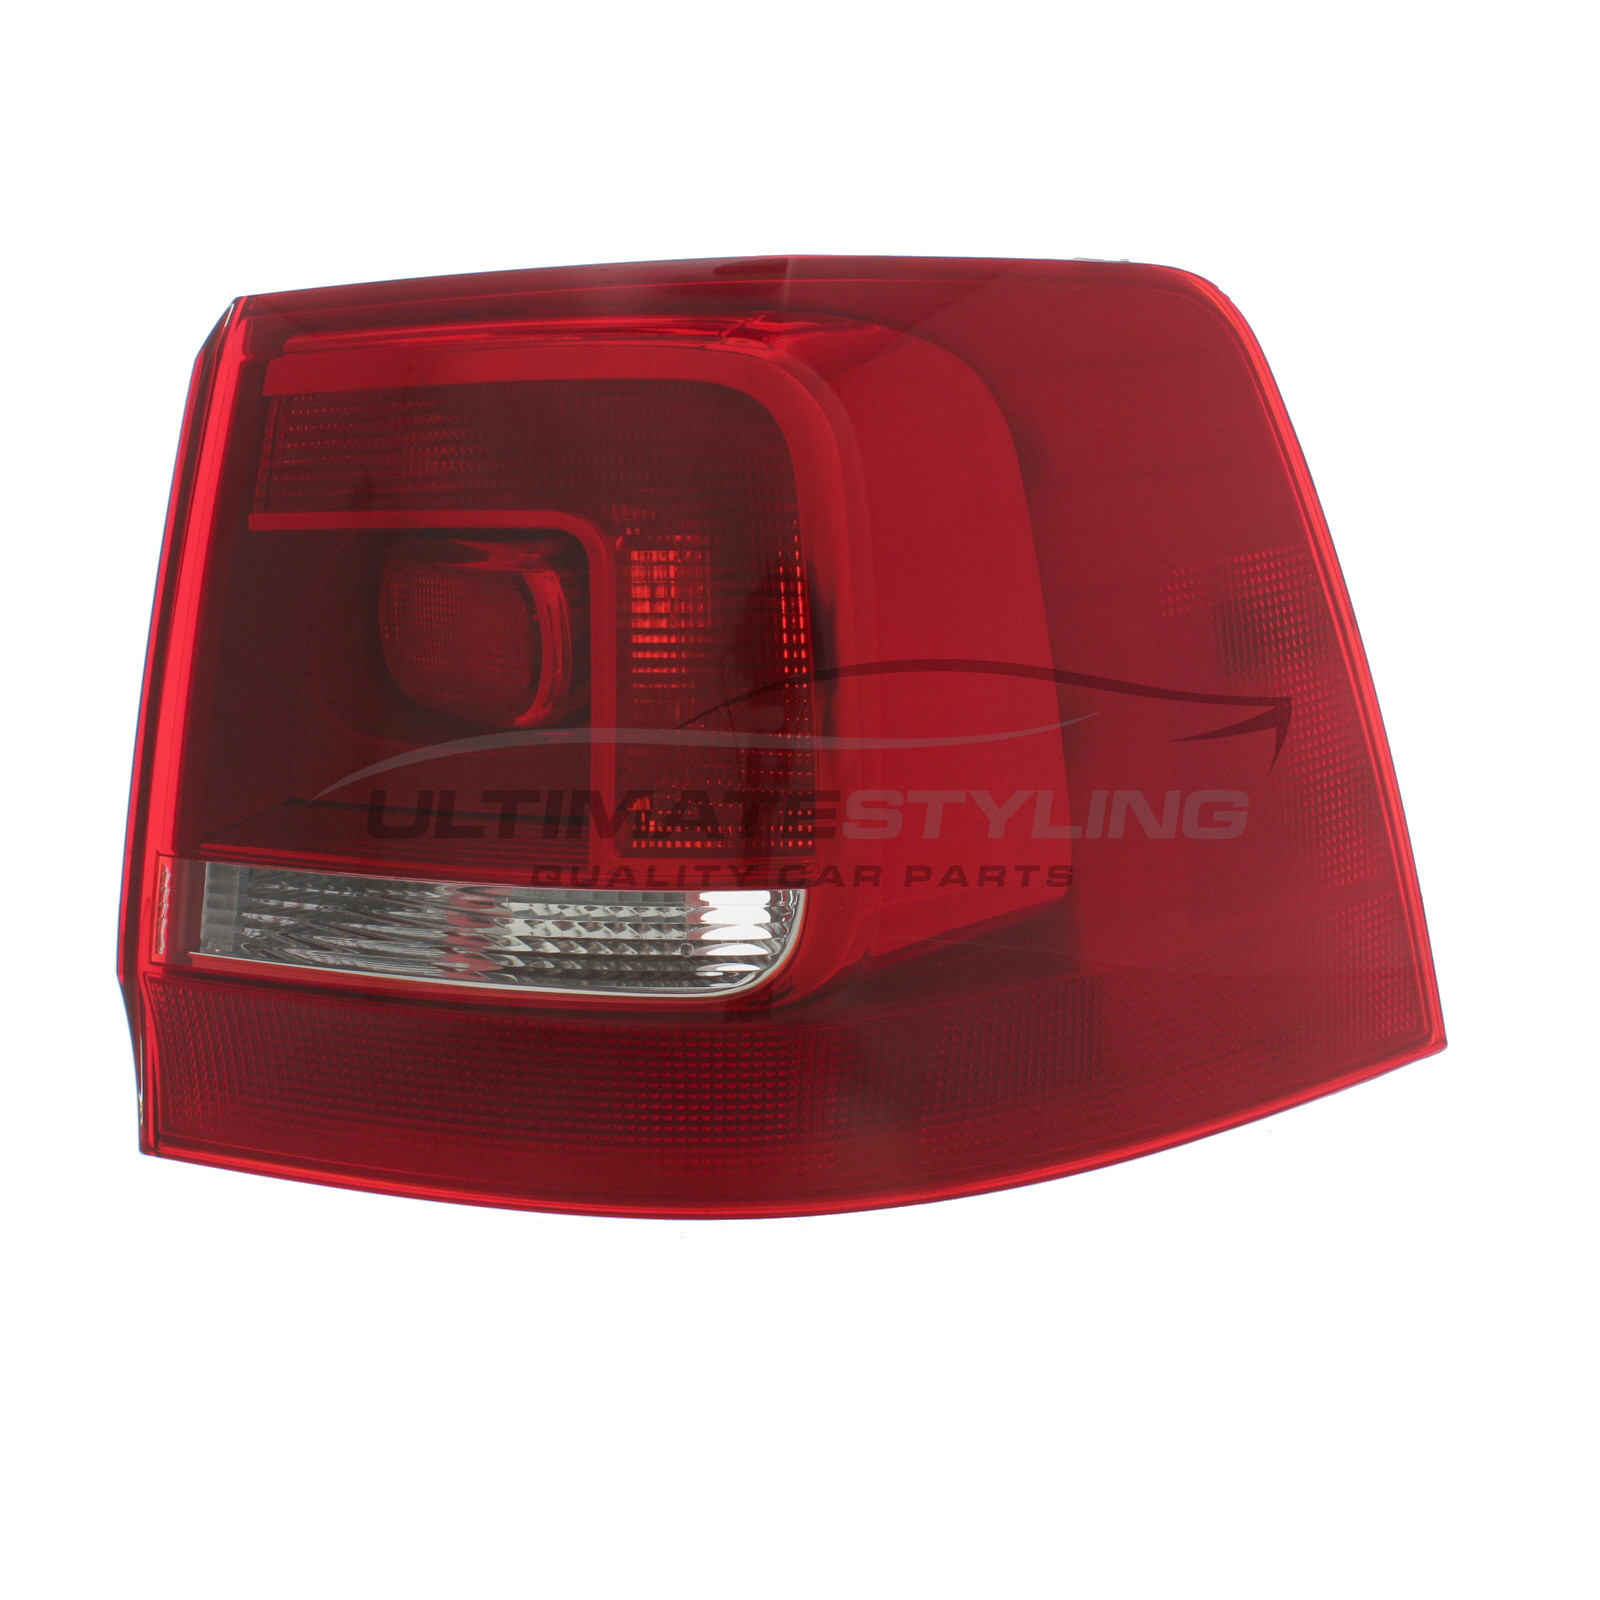 VW Sharan 2010-2015 Non-LED Outer (Wing) Rear Light / Tail Light Excluding Bulb Holder Drivers Side (RH)